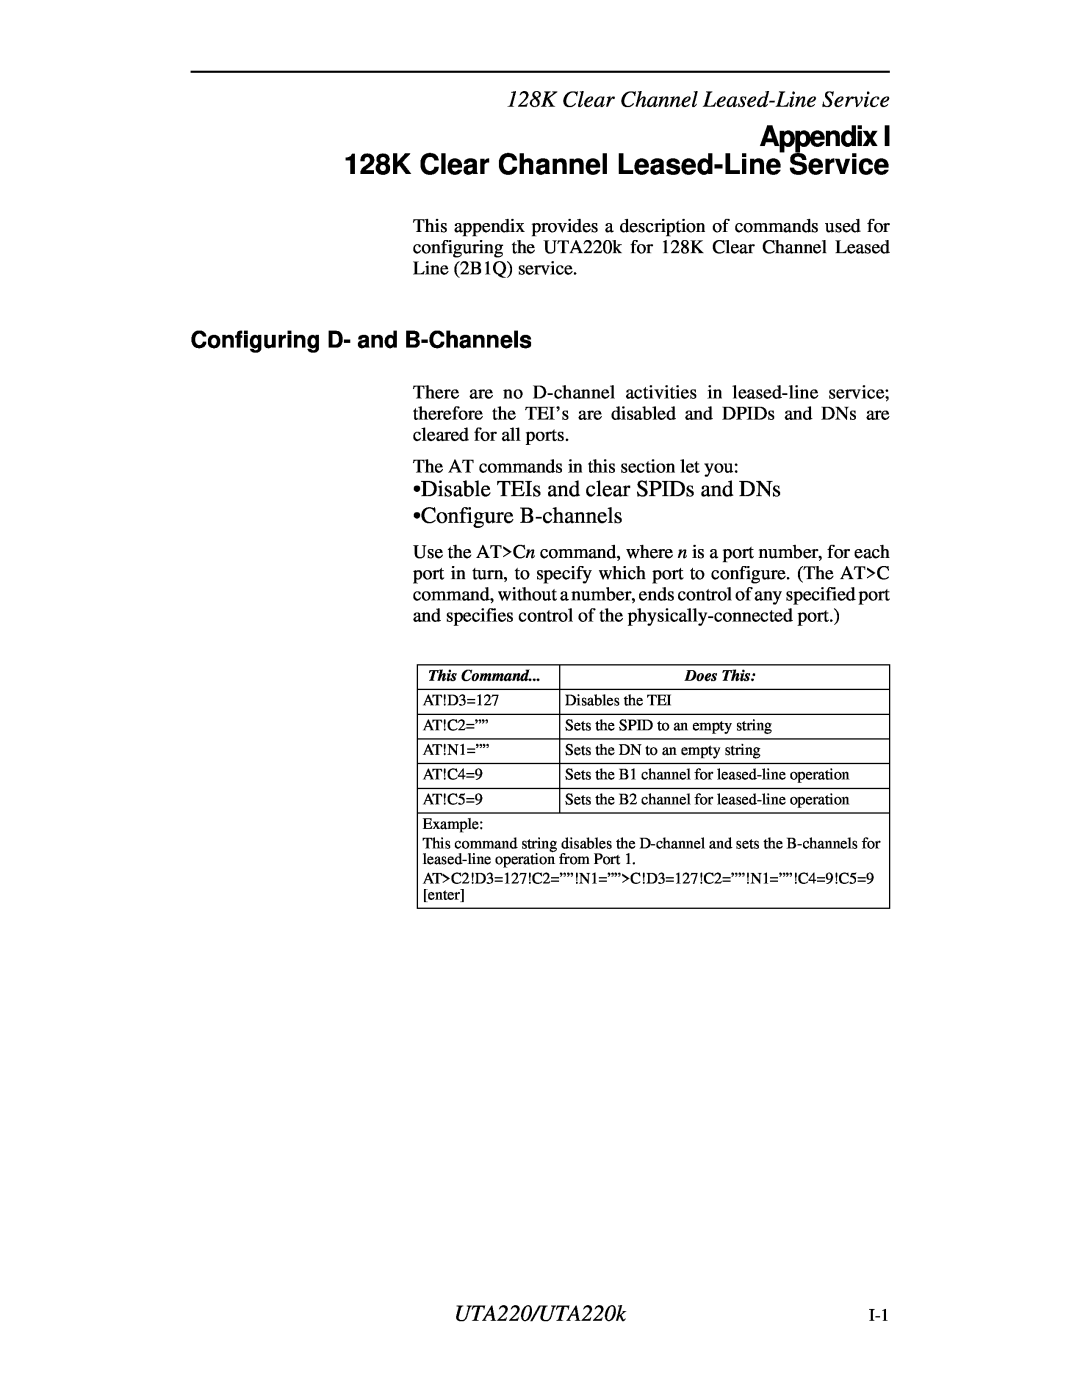 Northern UTA220/UTA220k manual Appendix I 128K Clear Channel Leased-Line Service, Configuring D- and B-Channels 